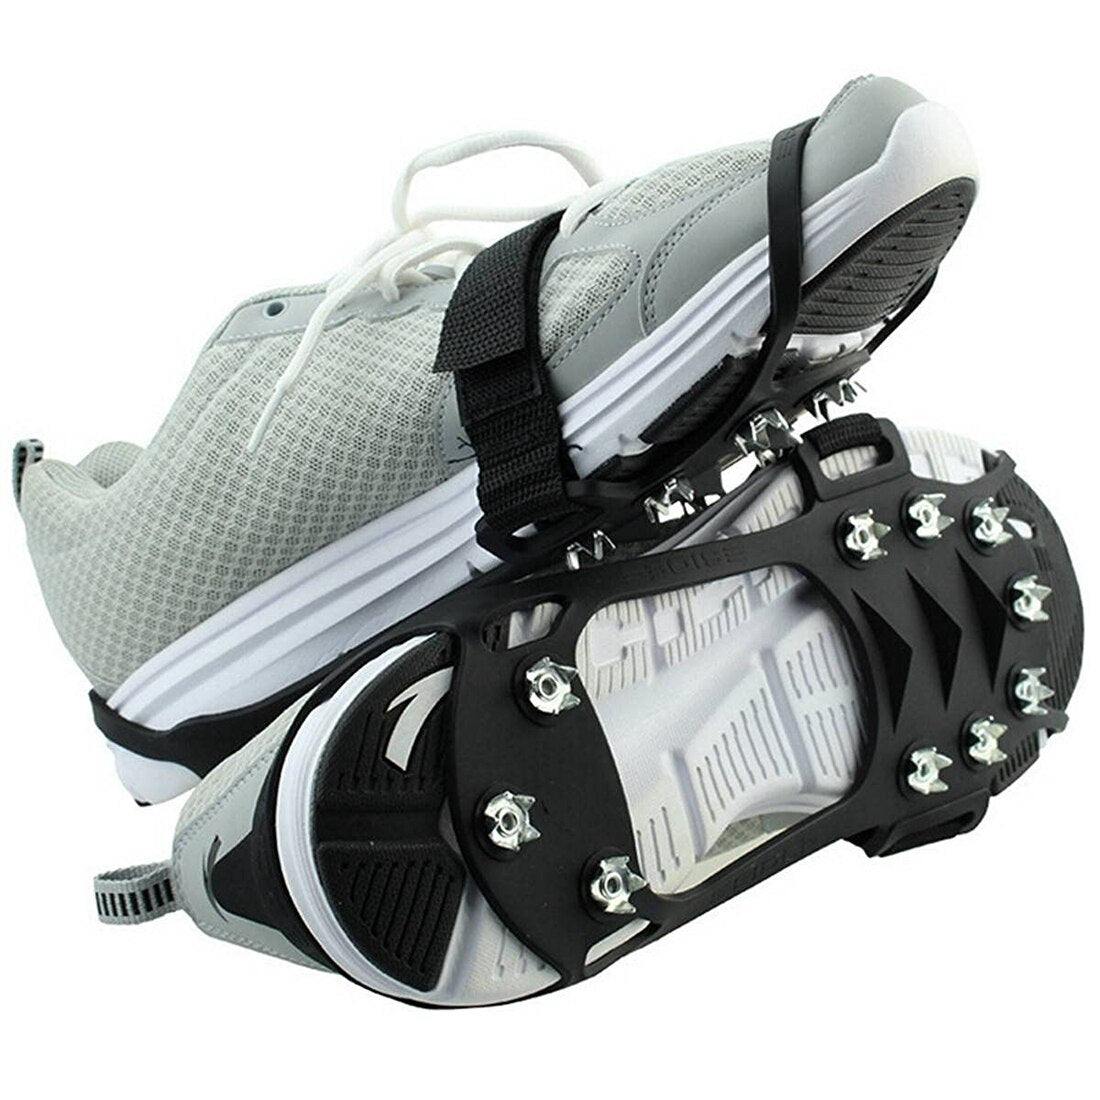 Shoe spikes Shoe claws, anti-slip crampons shoes, spikes Snow chain for the boot - ebowsos